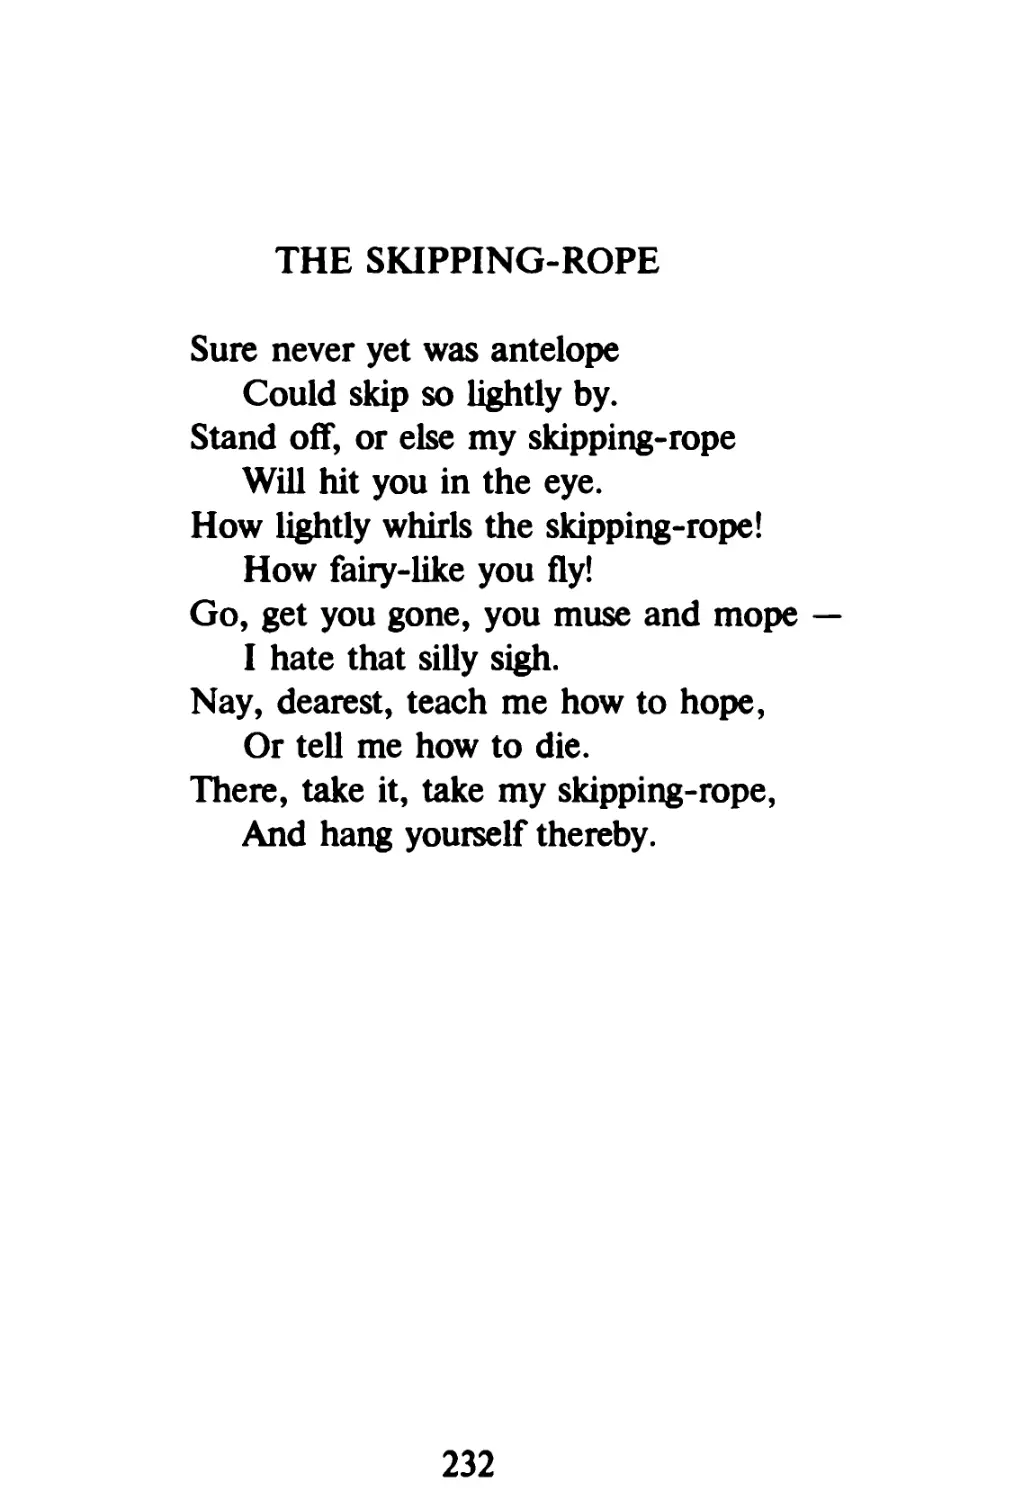 The Skipping-Rope